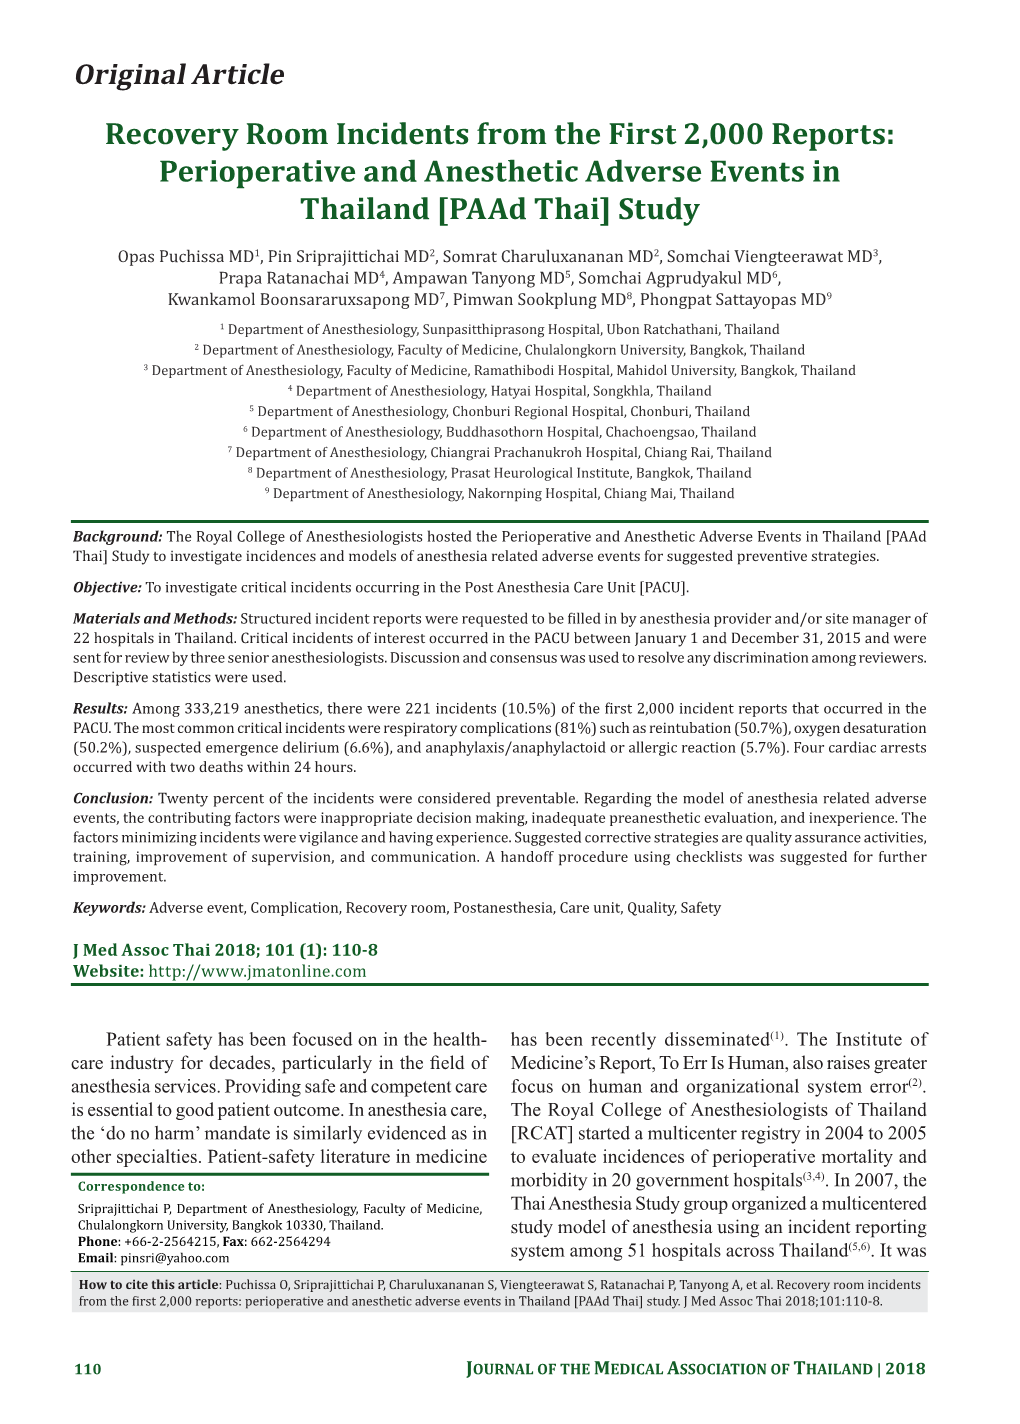 Perioperative and Anesthetic Adverse Events in Thailand [Paad Thai] Study